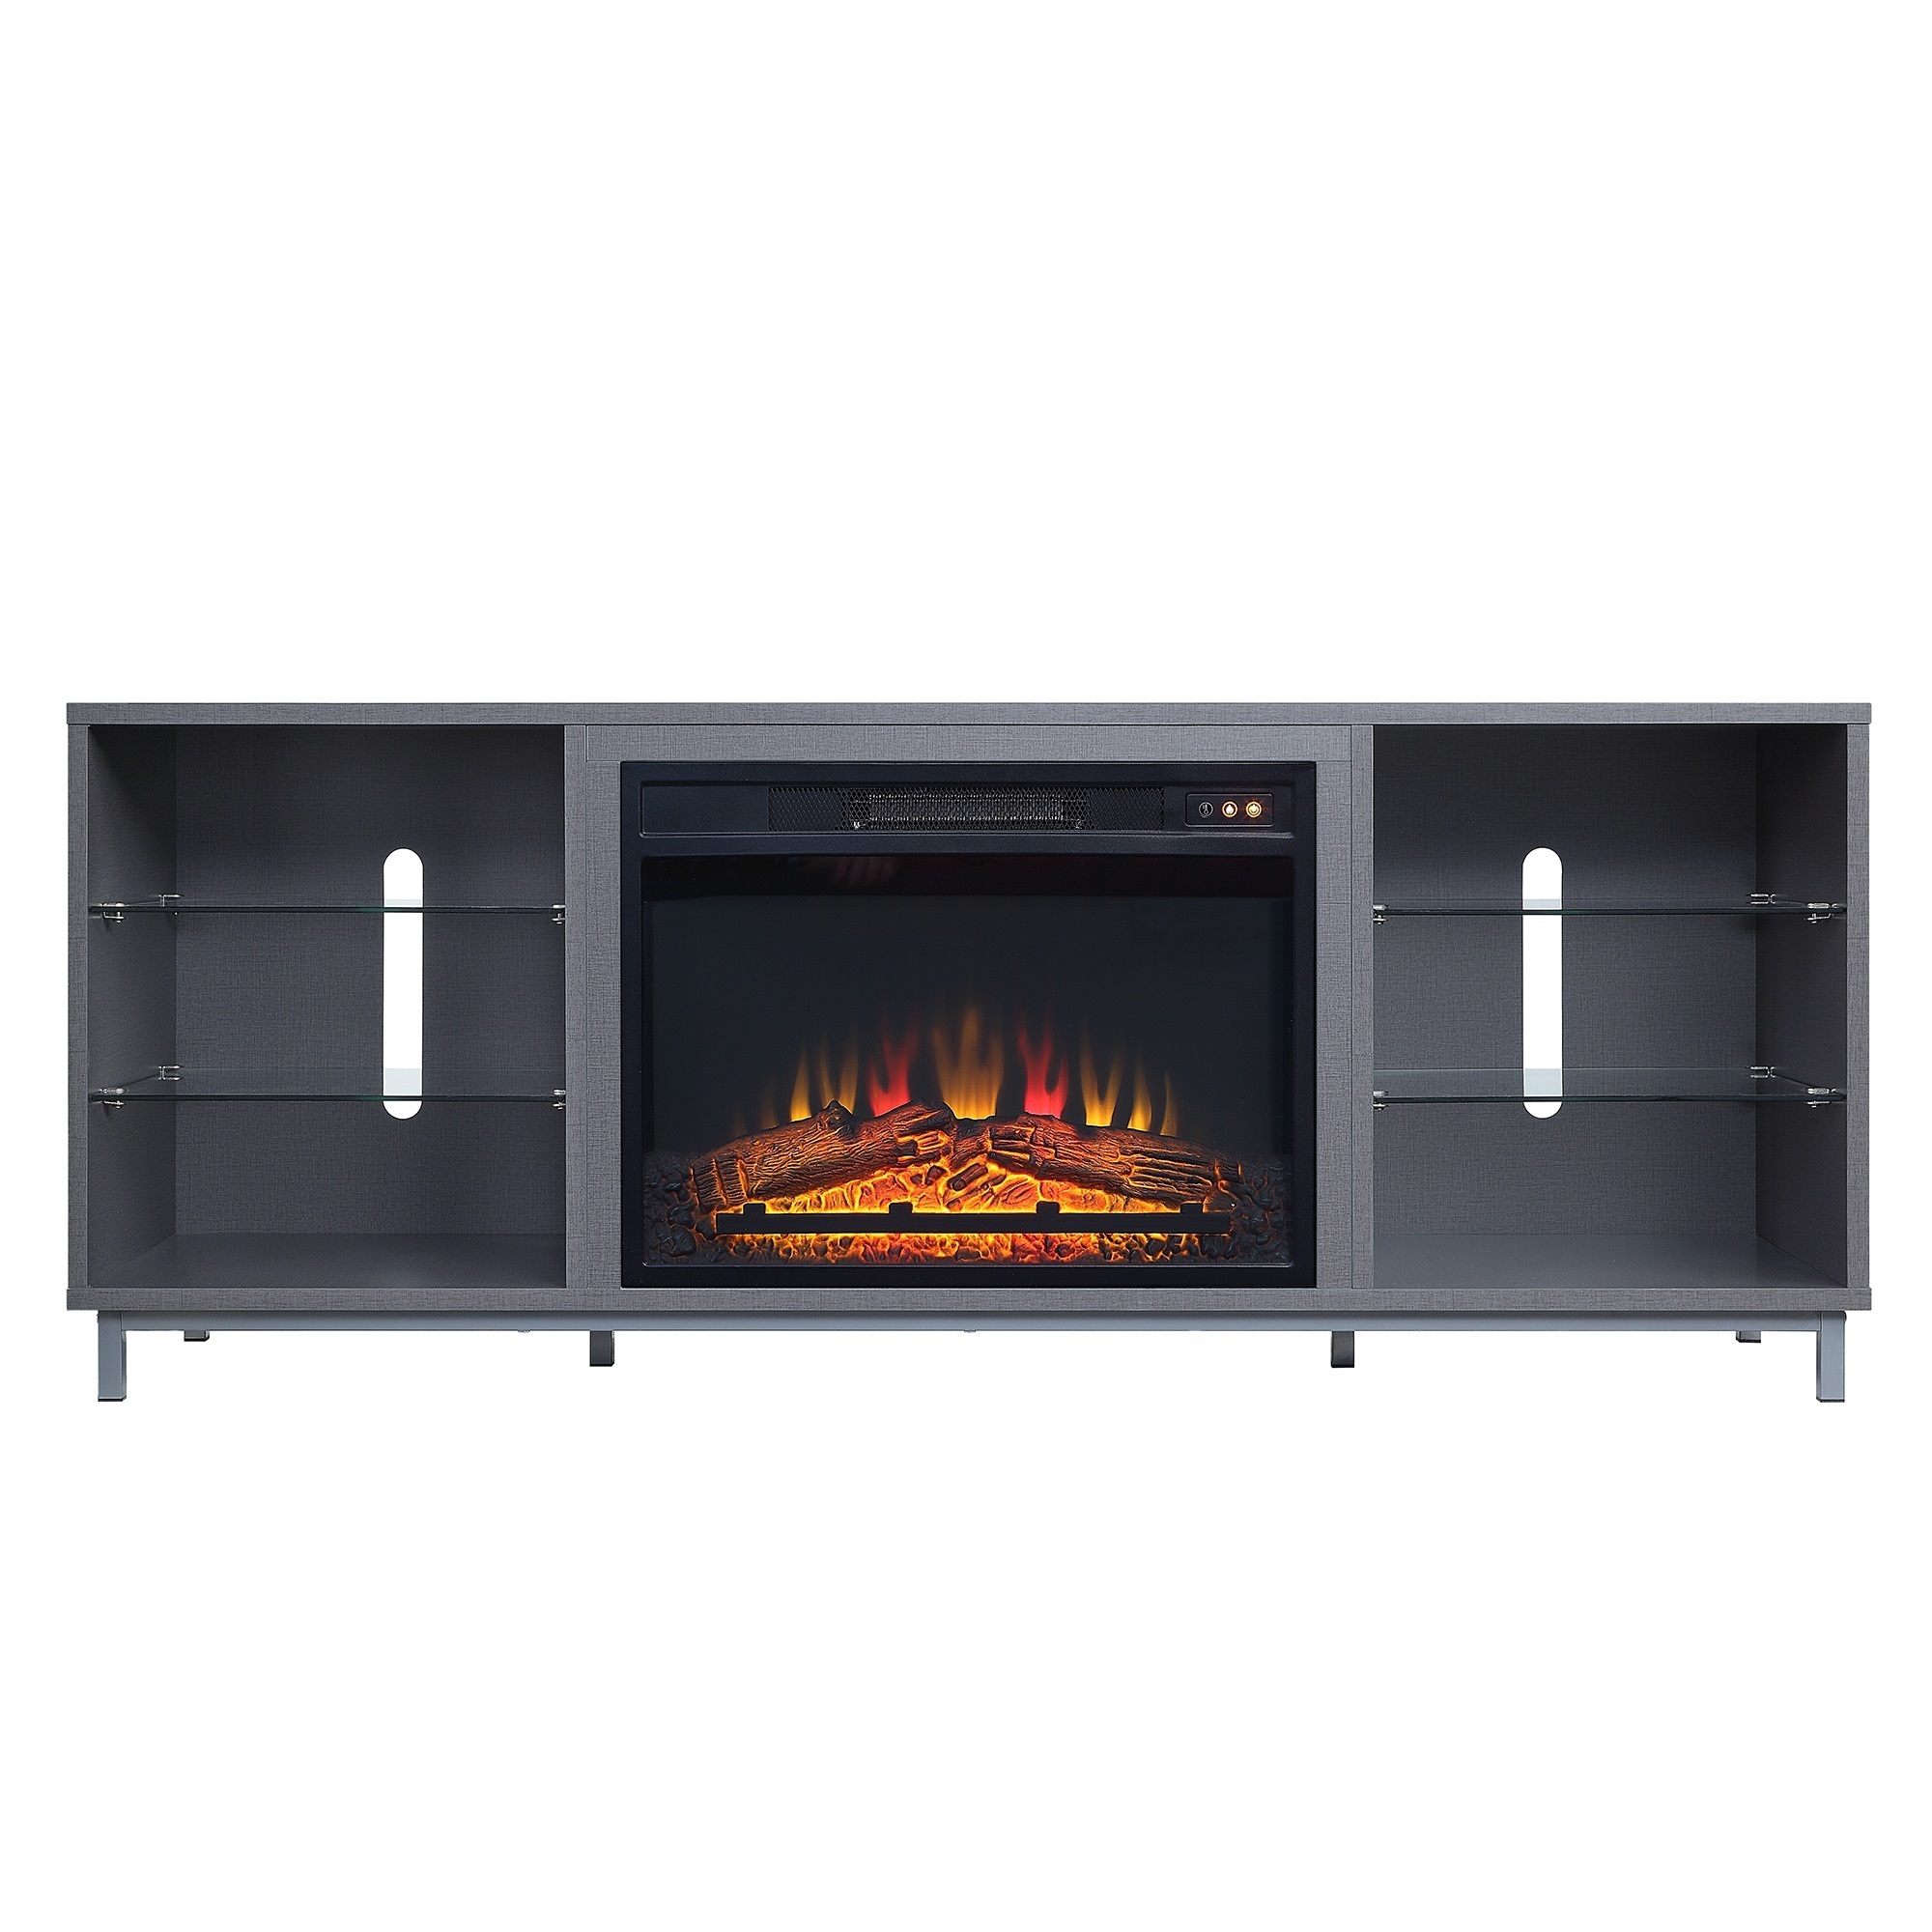 Manhattan Comfort, Brighton 60Inch Fireplace with Glass Shelves in Grey, Width 60 in, Height 24 in, Depth 16 in, Model FP4